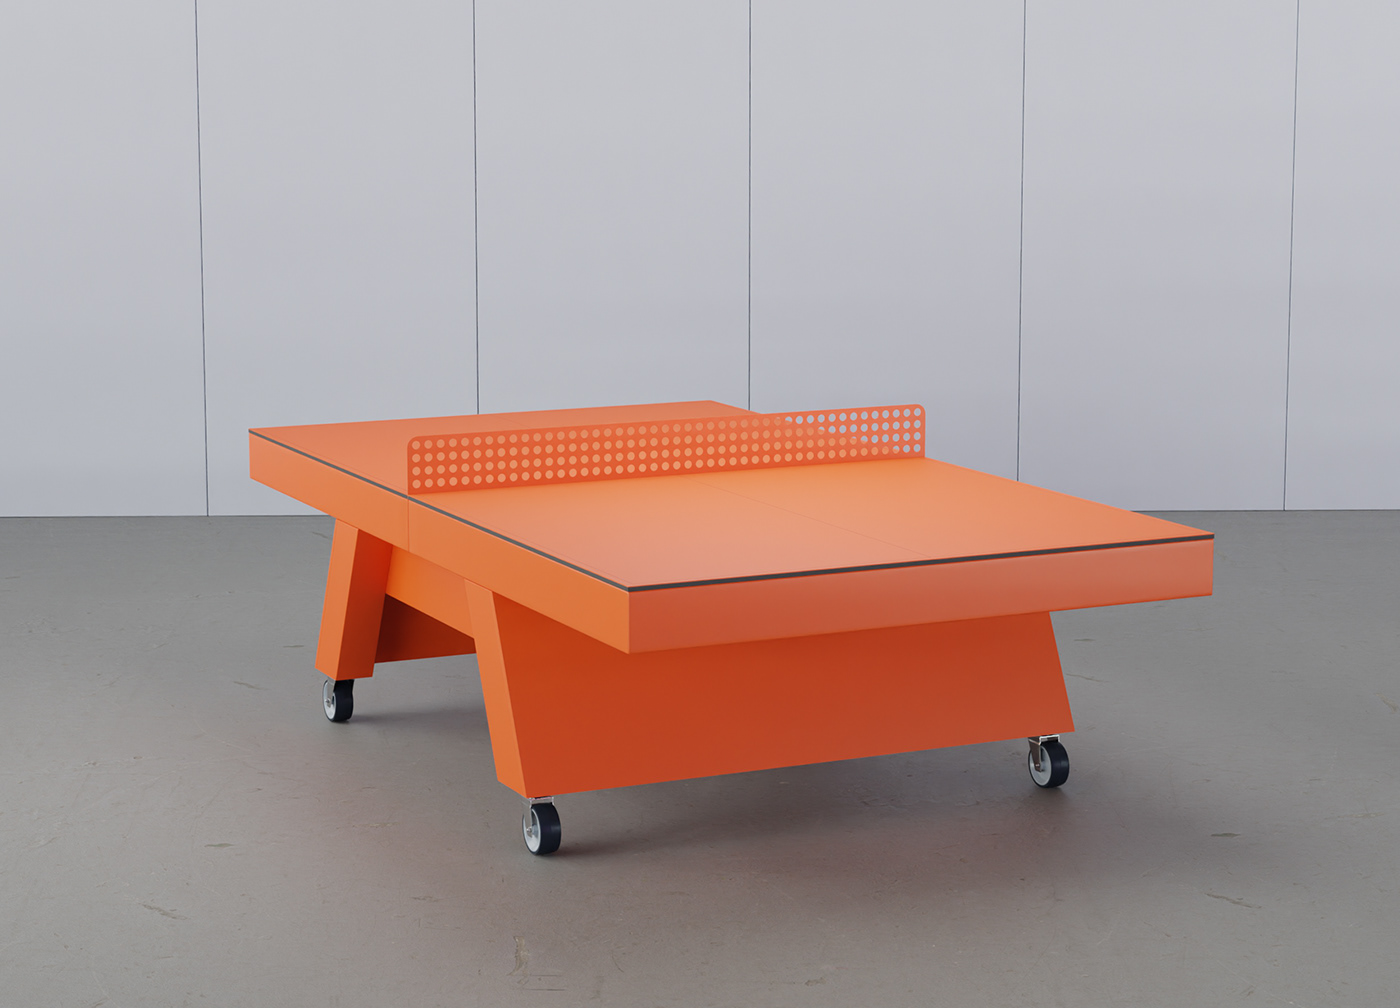 product design  object tennis table Product concept industrial design  Render visualization 3D